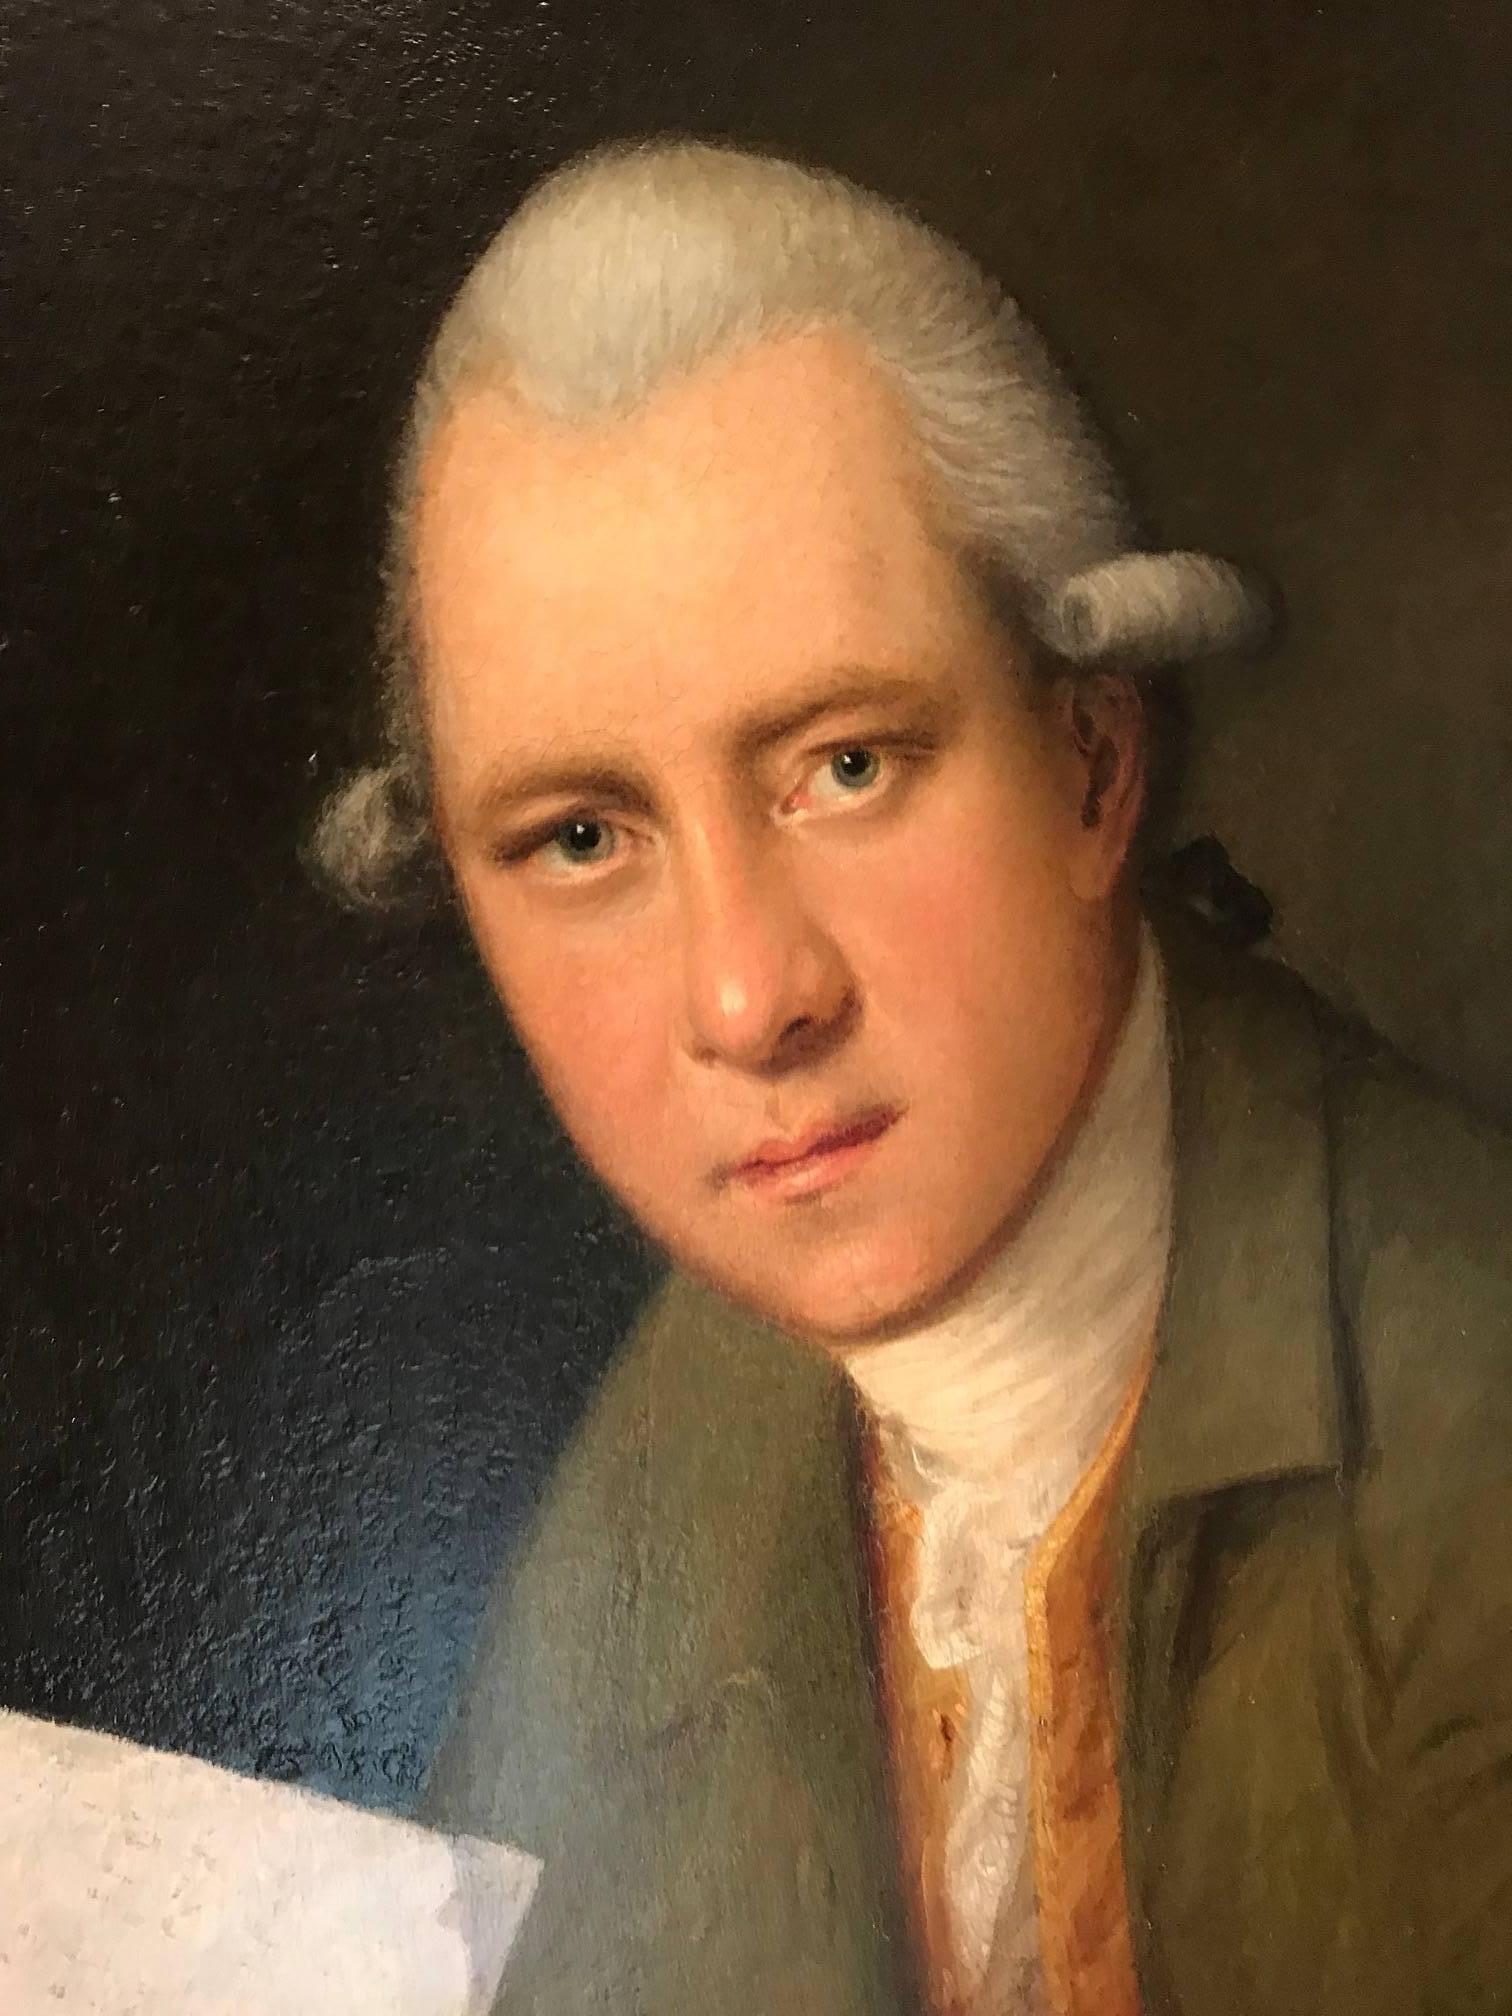 Thomas Hickey is considered one of the most important Irish artists of the 18th century.
This portrait of John Parke shows him with an oboe, and holding the sheet music for Handel’s Largo, Ombra Mai Fu, from his opera Serse. Parke was a senior